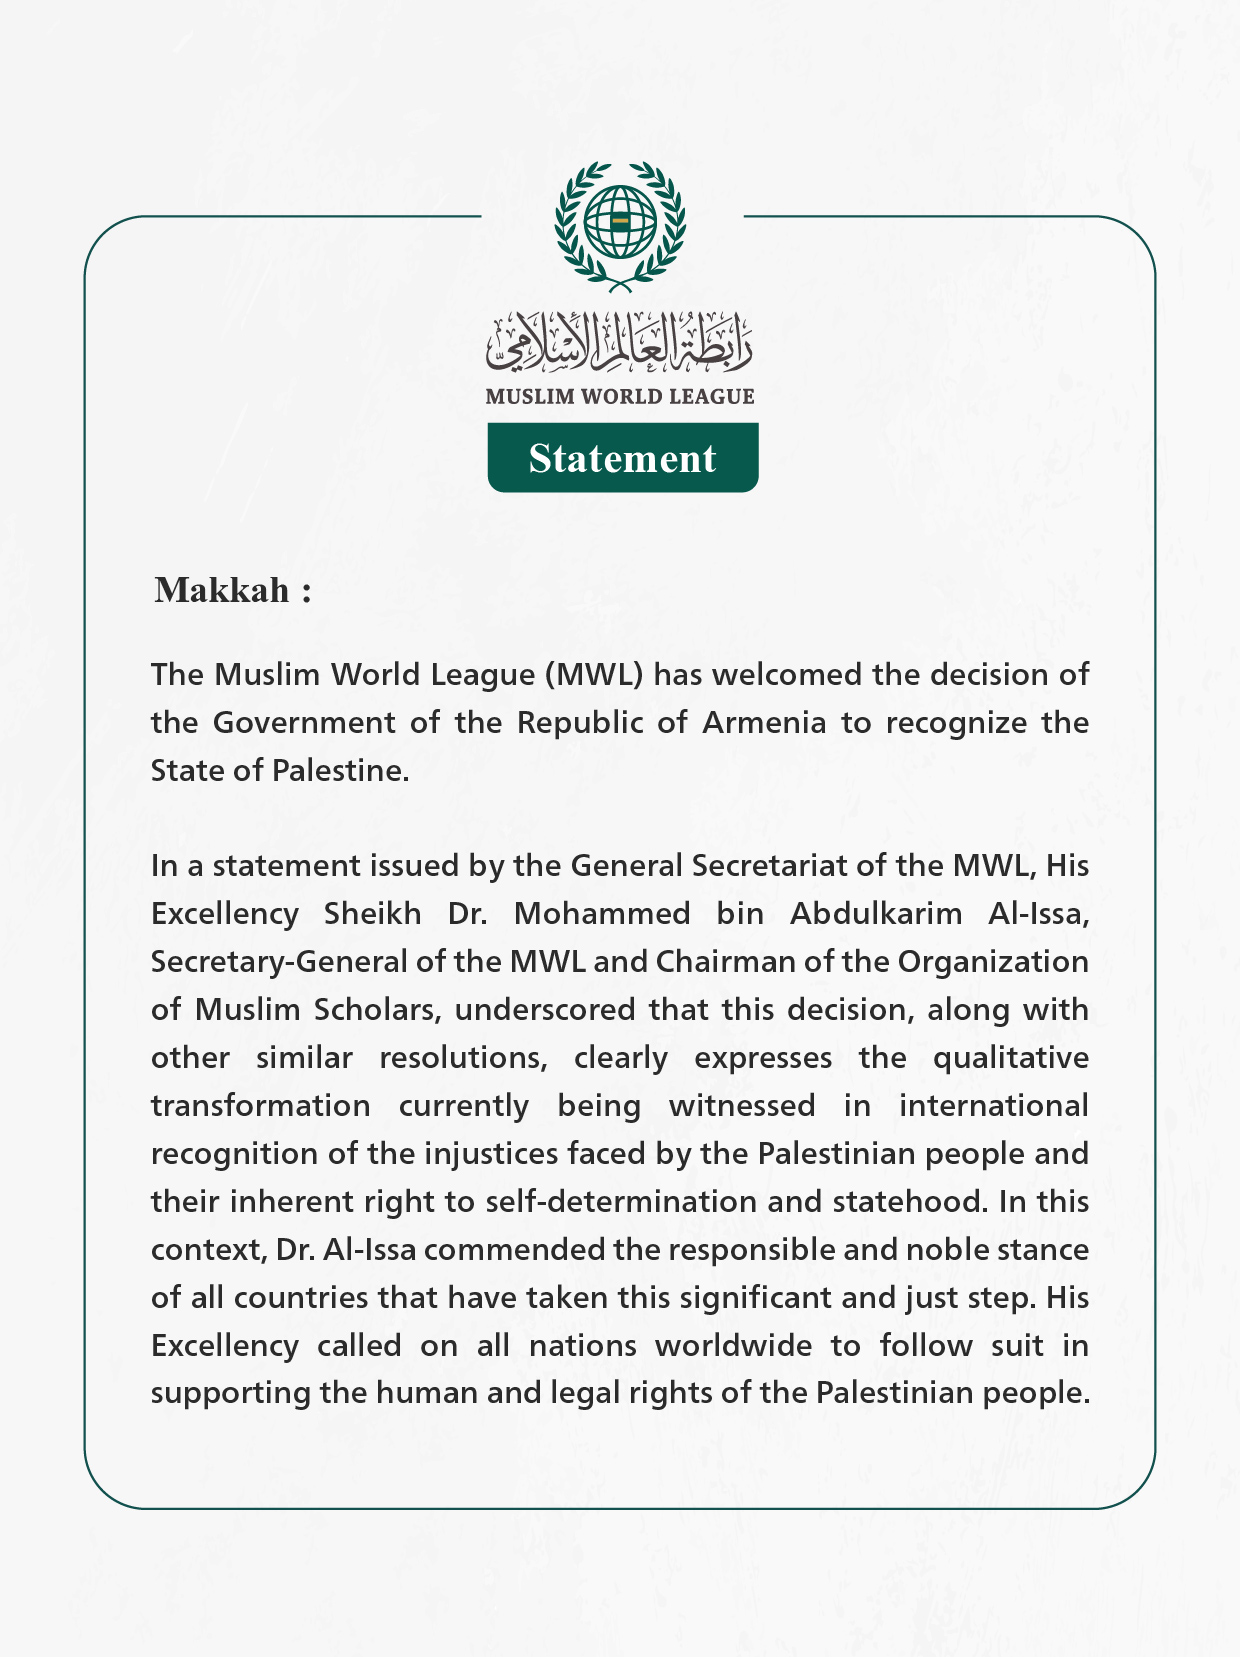 The Muslim World League Welcomes the Decision of the Government of Armenia to Recognize the State of Palestine